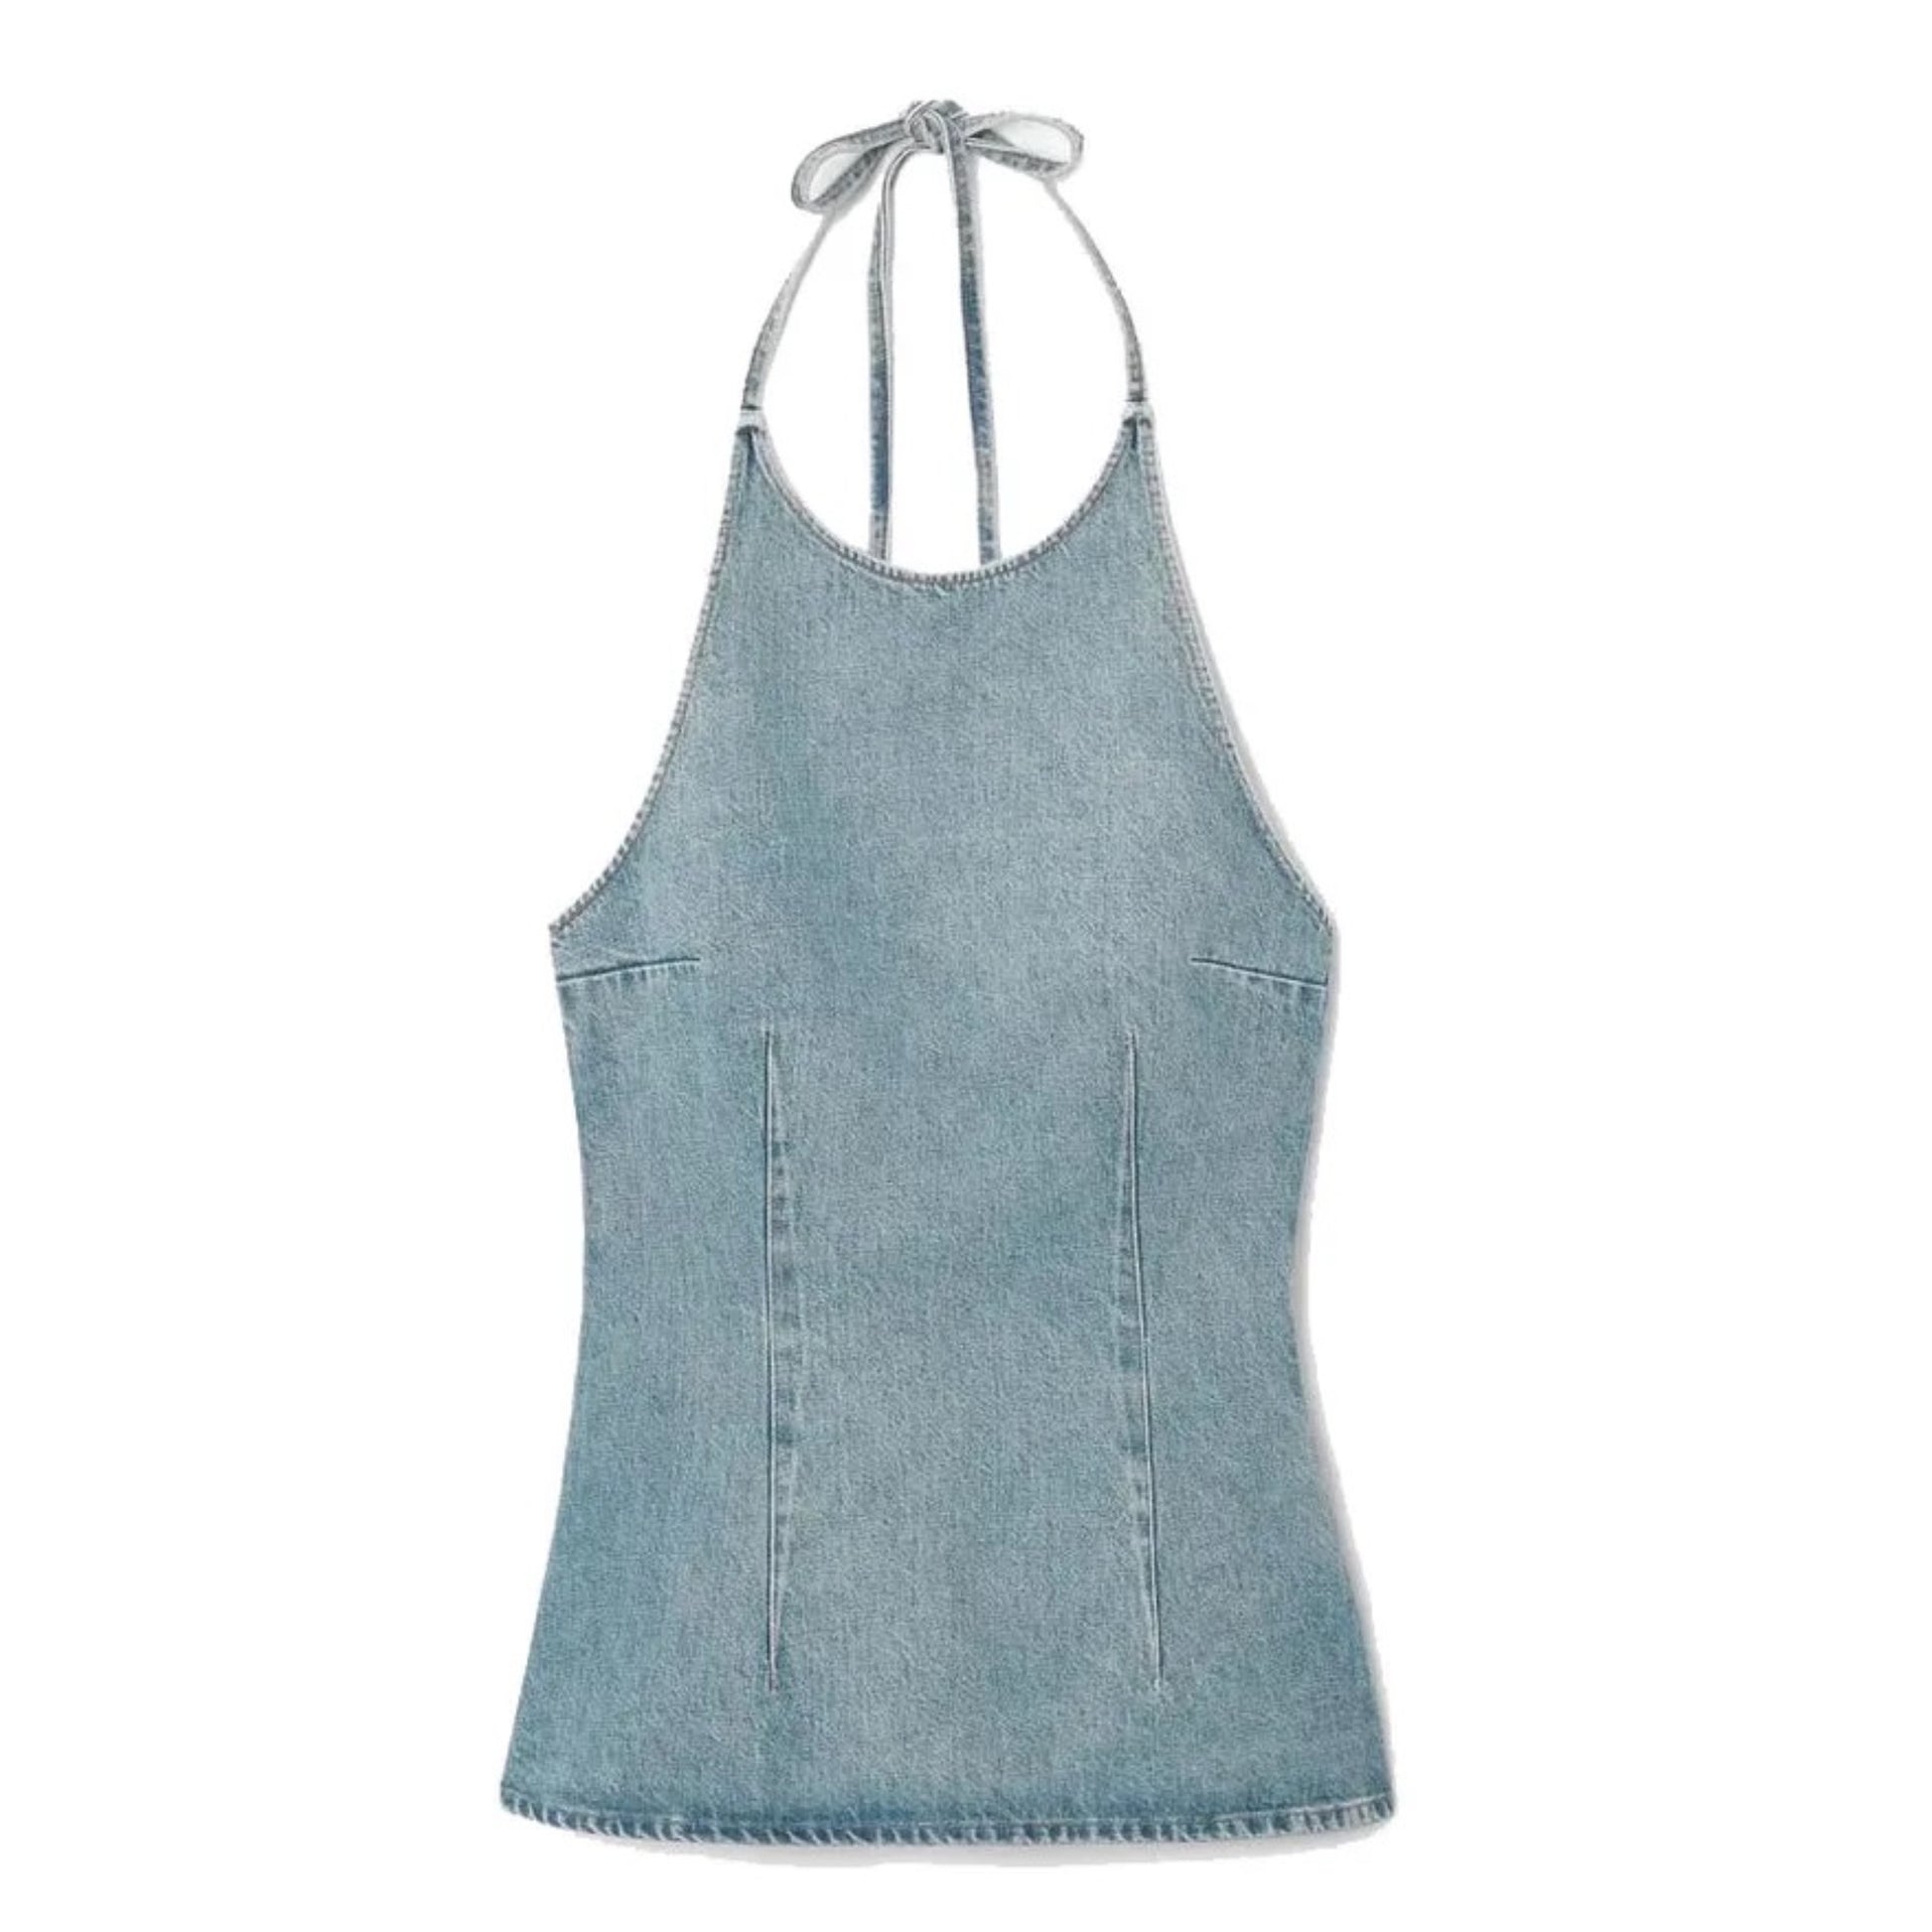 light-blue-bleach-wash-faded-distressed-vintage-retro-slim-fit-bodycon-corset-cinched-waist-sleeveless-spaghetti-strap-round-neckline-backless-open-back-halter-denim-jean-full-length-hip-camisole-tank-top-blouse-shirt-women-ladies-teens-tweens-chic-trendy-spring-2024-summer-casual-feminine-western-y2k-cocktail-party-sexy-date-night-out-club-wear-90s-minimalist-minimalism-office-siren-stockholm-style-zara-revolve-aritzia-reformation-dupe